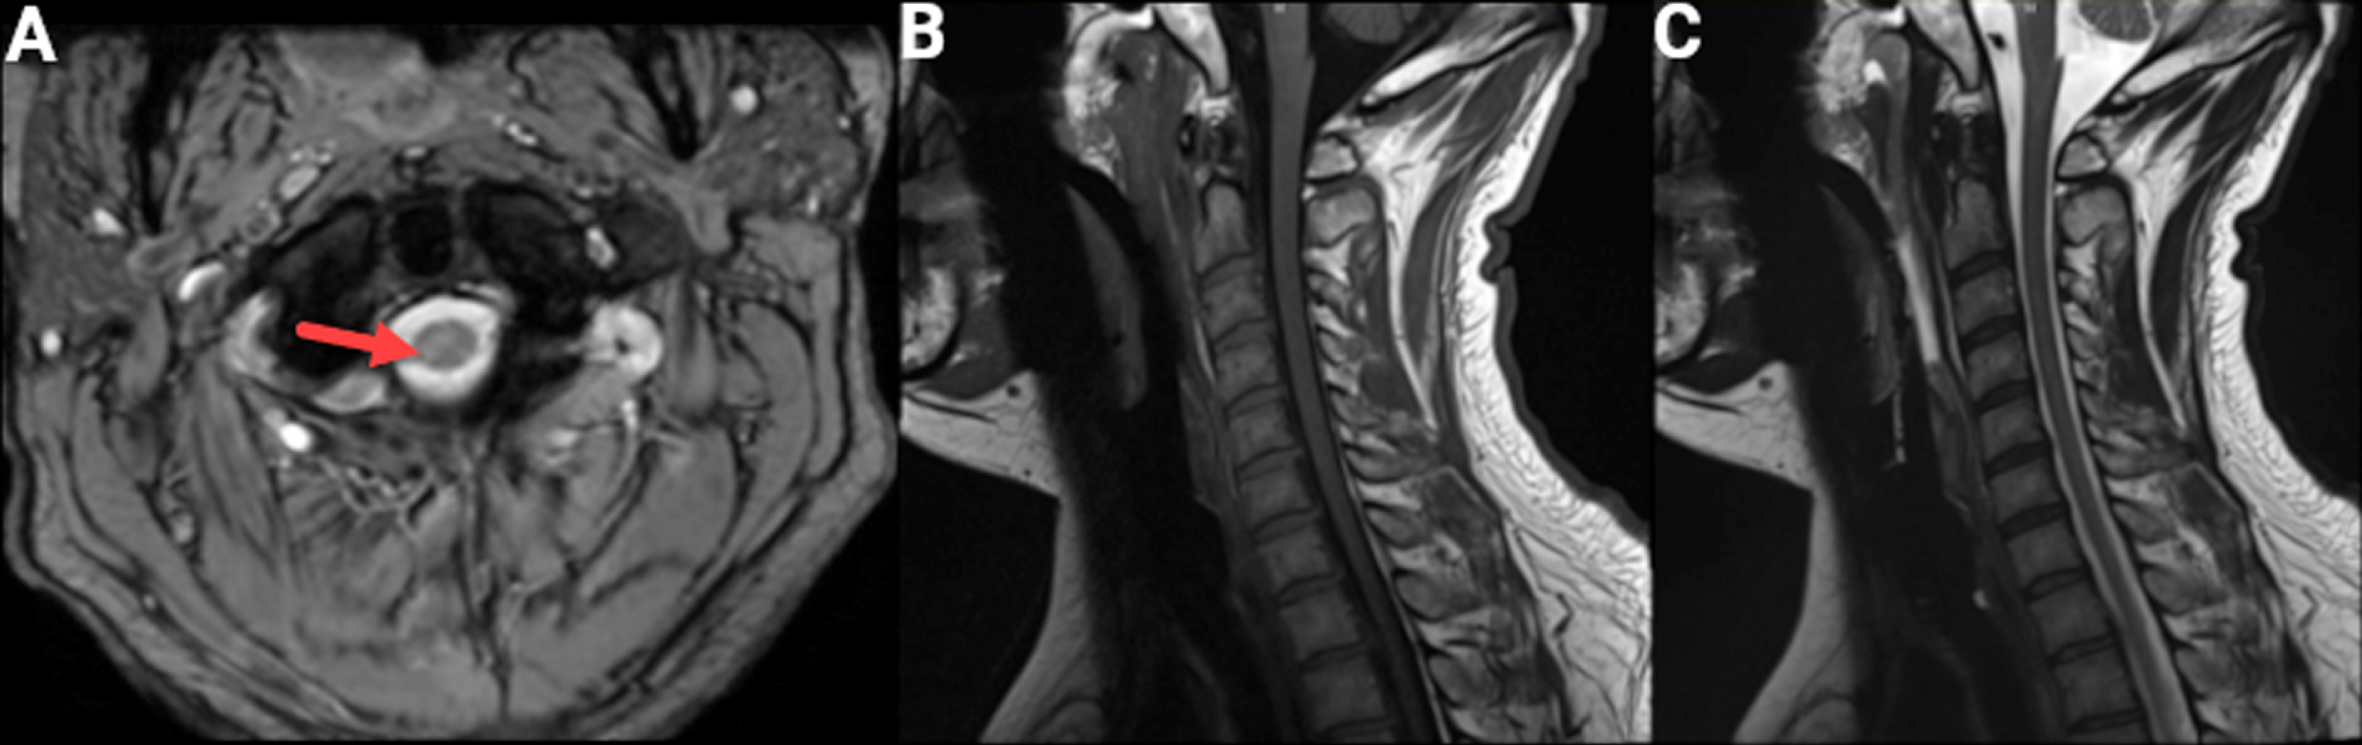 Cervical MRI. An MRI of the cervical spine and cord was obtained because of concomitant signs of central and peripheral motor system dysfunction at a cervical level. A) Axial GRE T2 sequence showing subtle T2 hyperintensity in the right (arrow) greater than left corticospinal tract. Sagittal T1 (B) and sagittal T2 (C) sequences without evidence of cord compression.